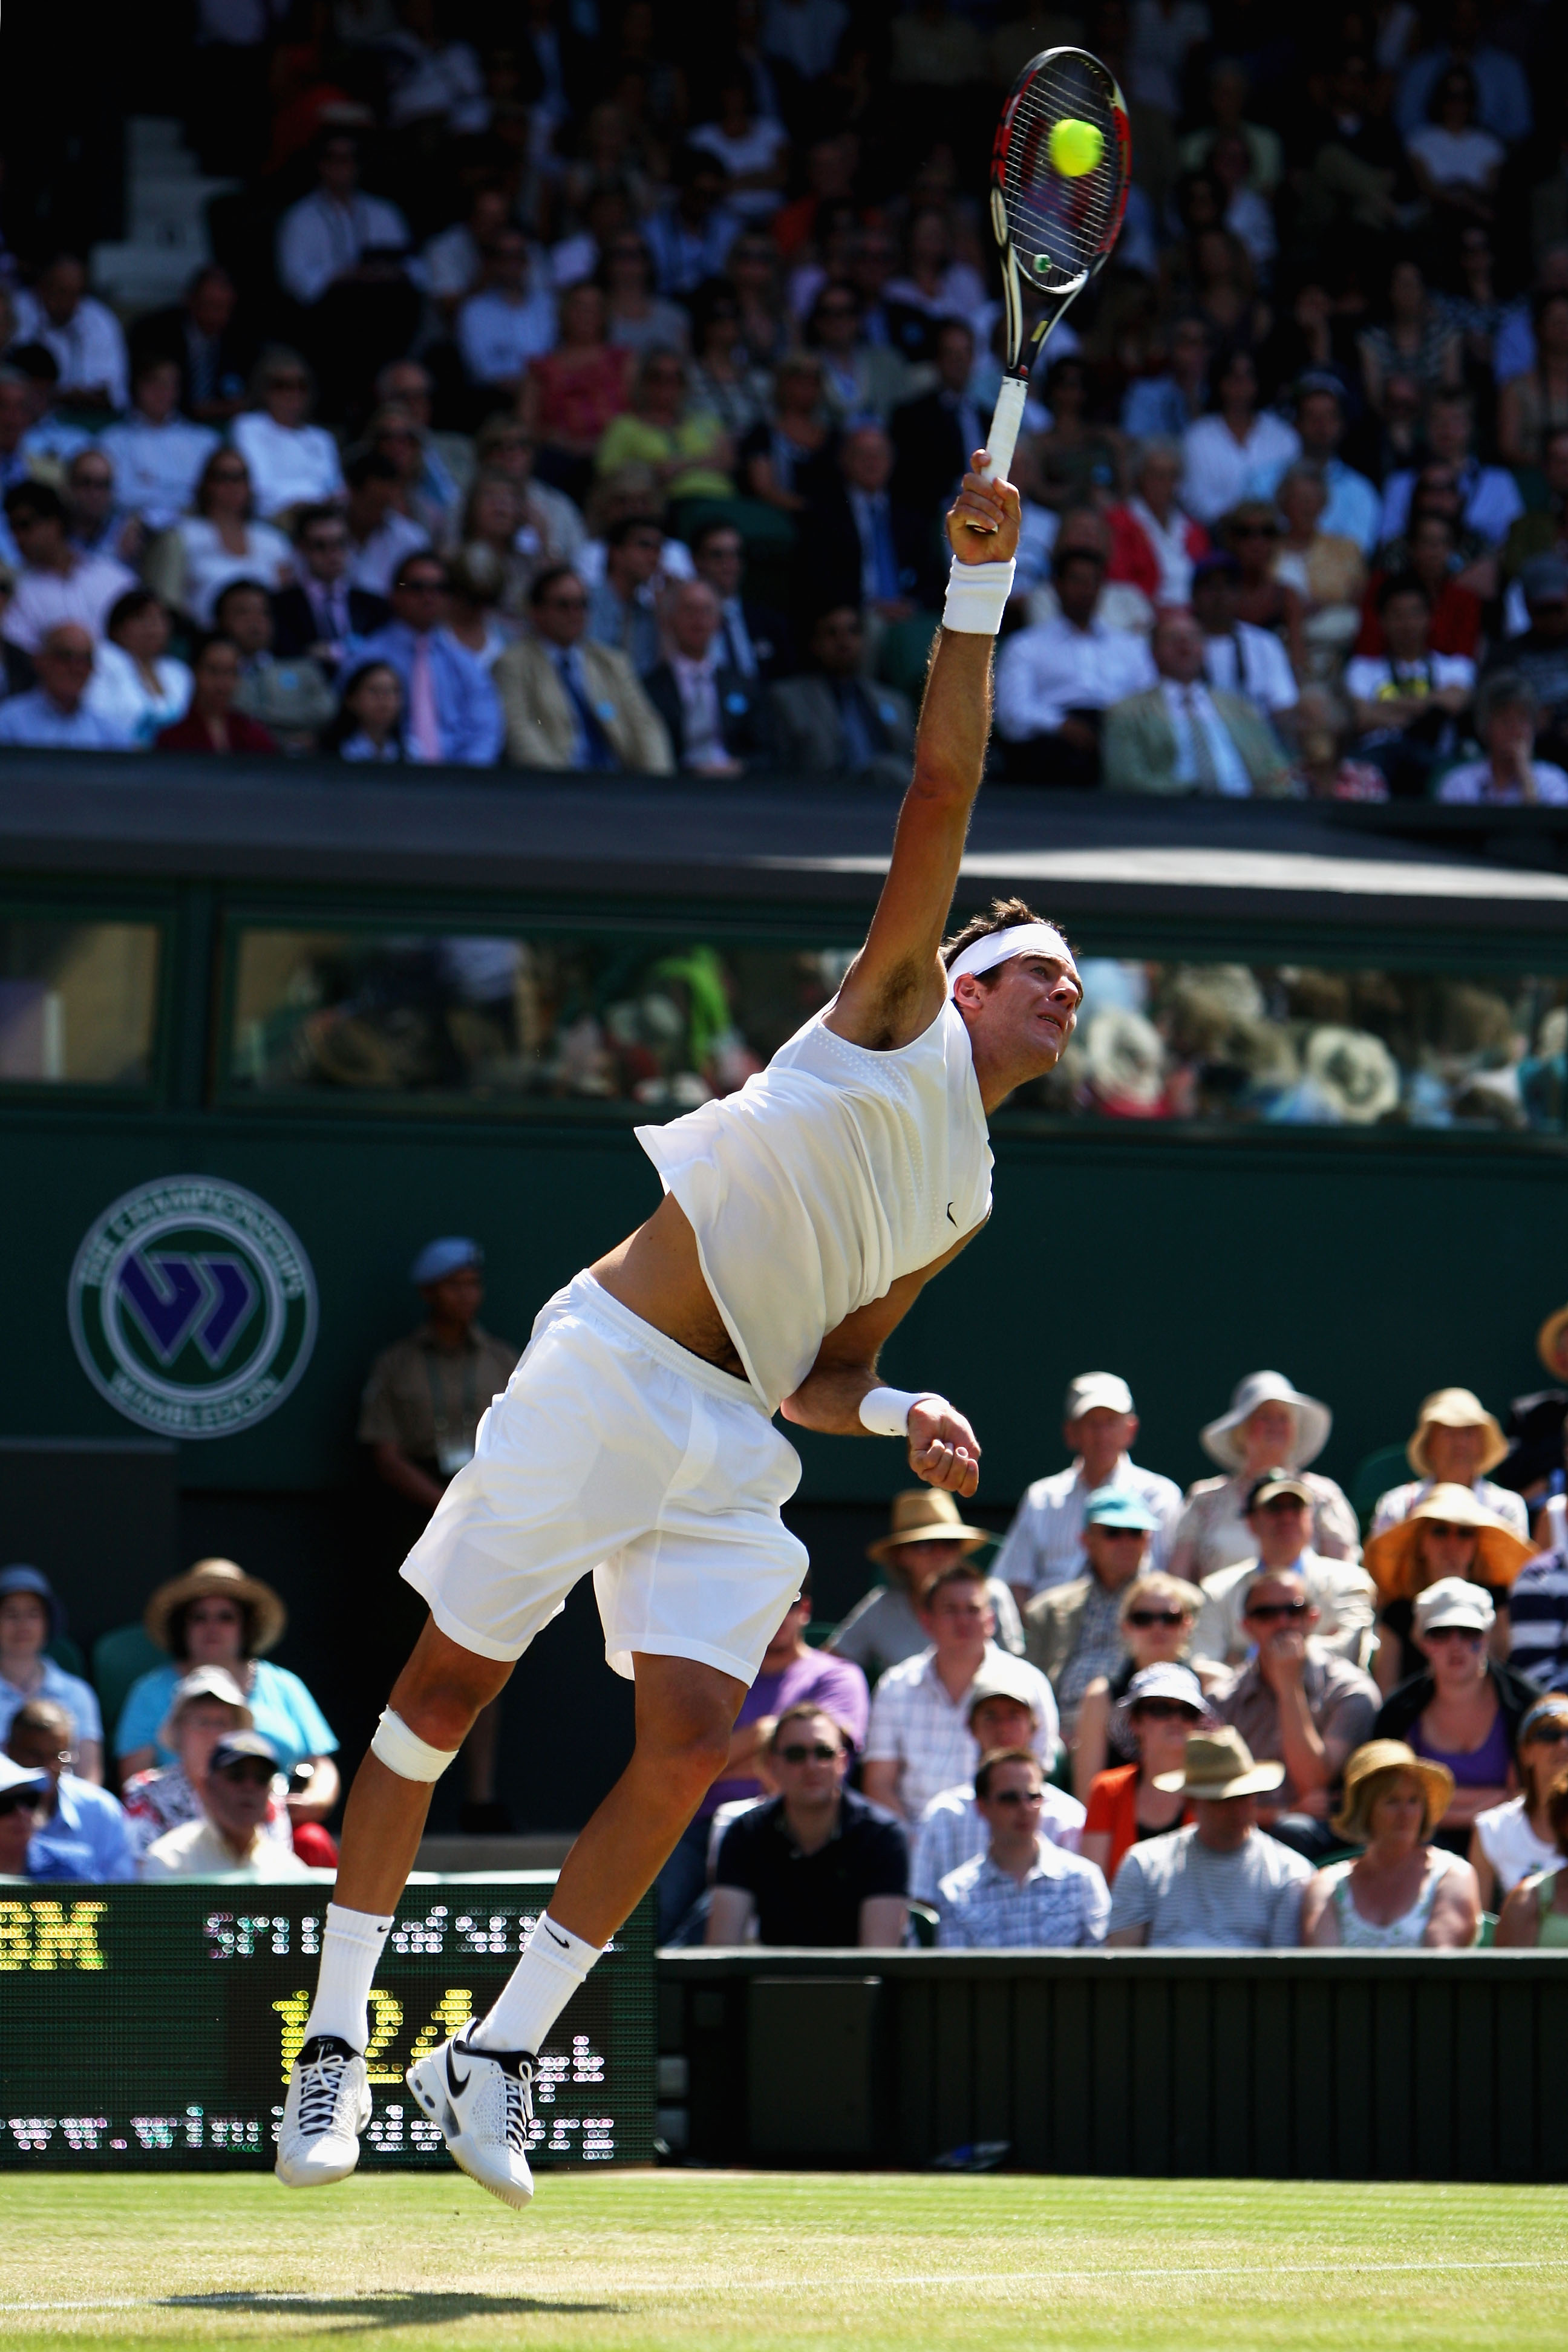 WIMBLEDON, ENGLAND - JUNE 25:  Juan Martin Del Potro of Argentina serves during the men's singles second round match against Lleyton Hewitt of Australia on Day Four of the Wimbledon Lawn Tennis Championships at the All England Lawn Tennis and Croquet Club